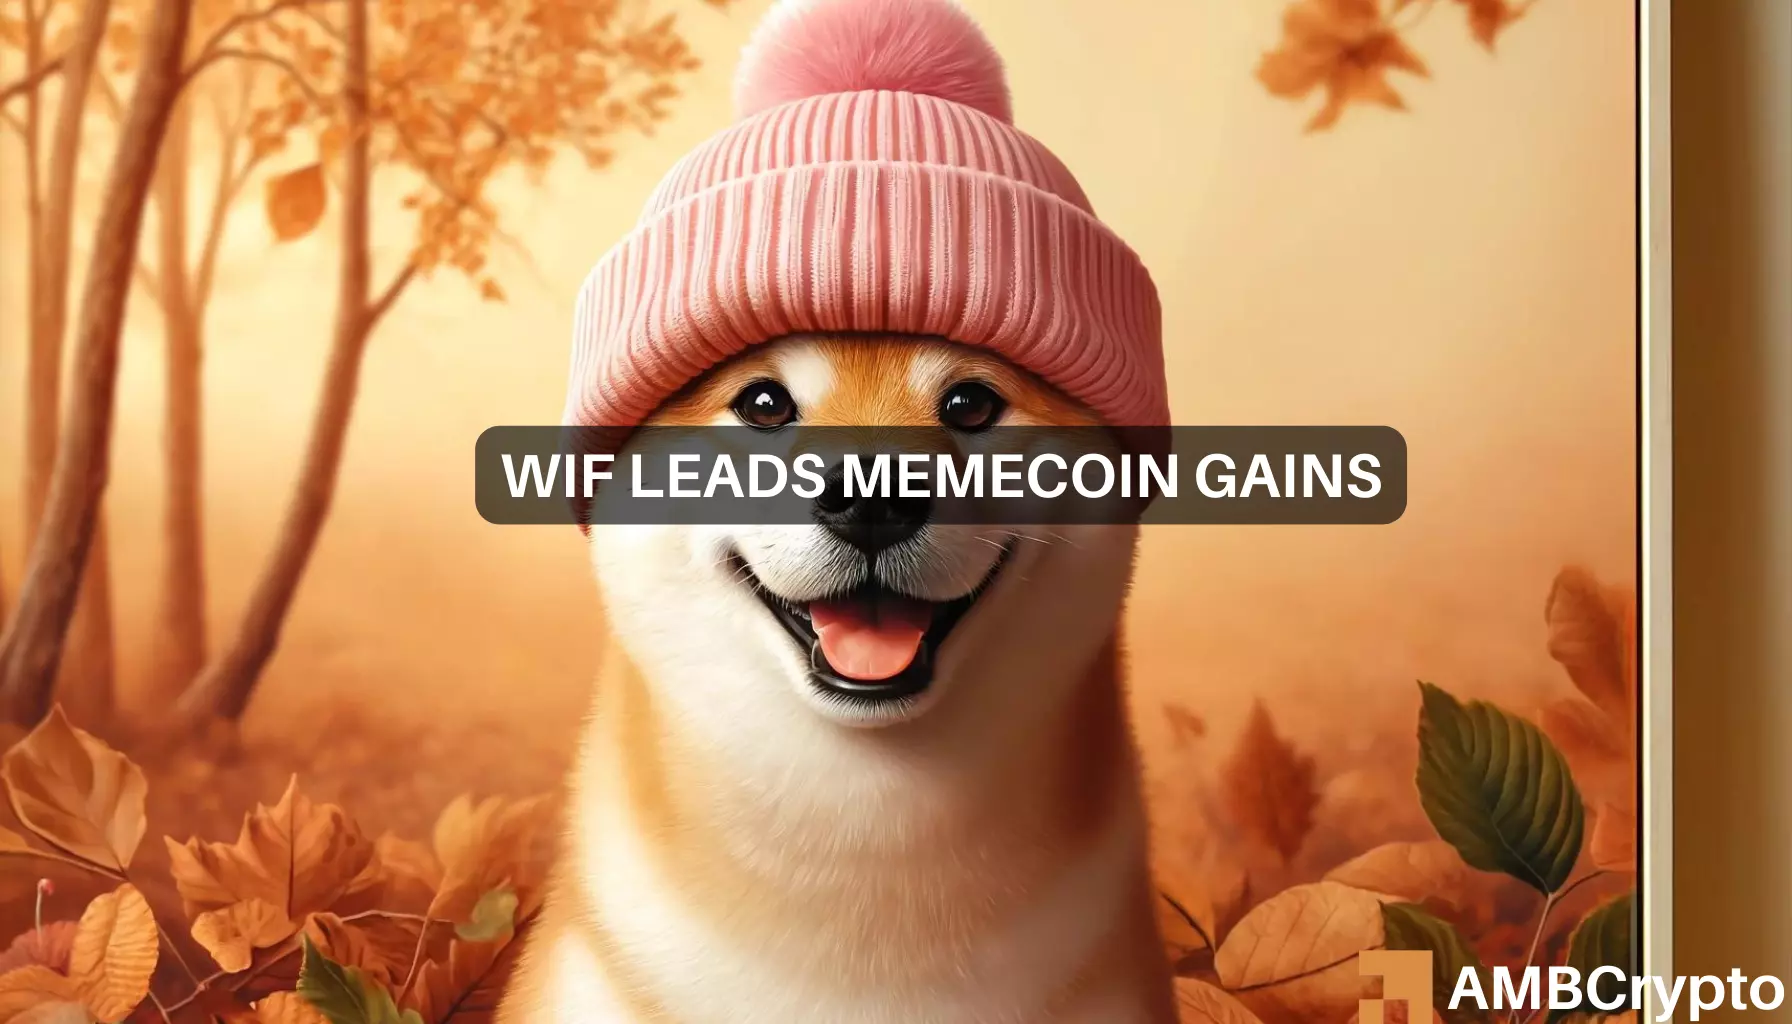 dogwifhat dominates memecoins, jumps 20% in a week: What's next?